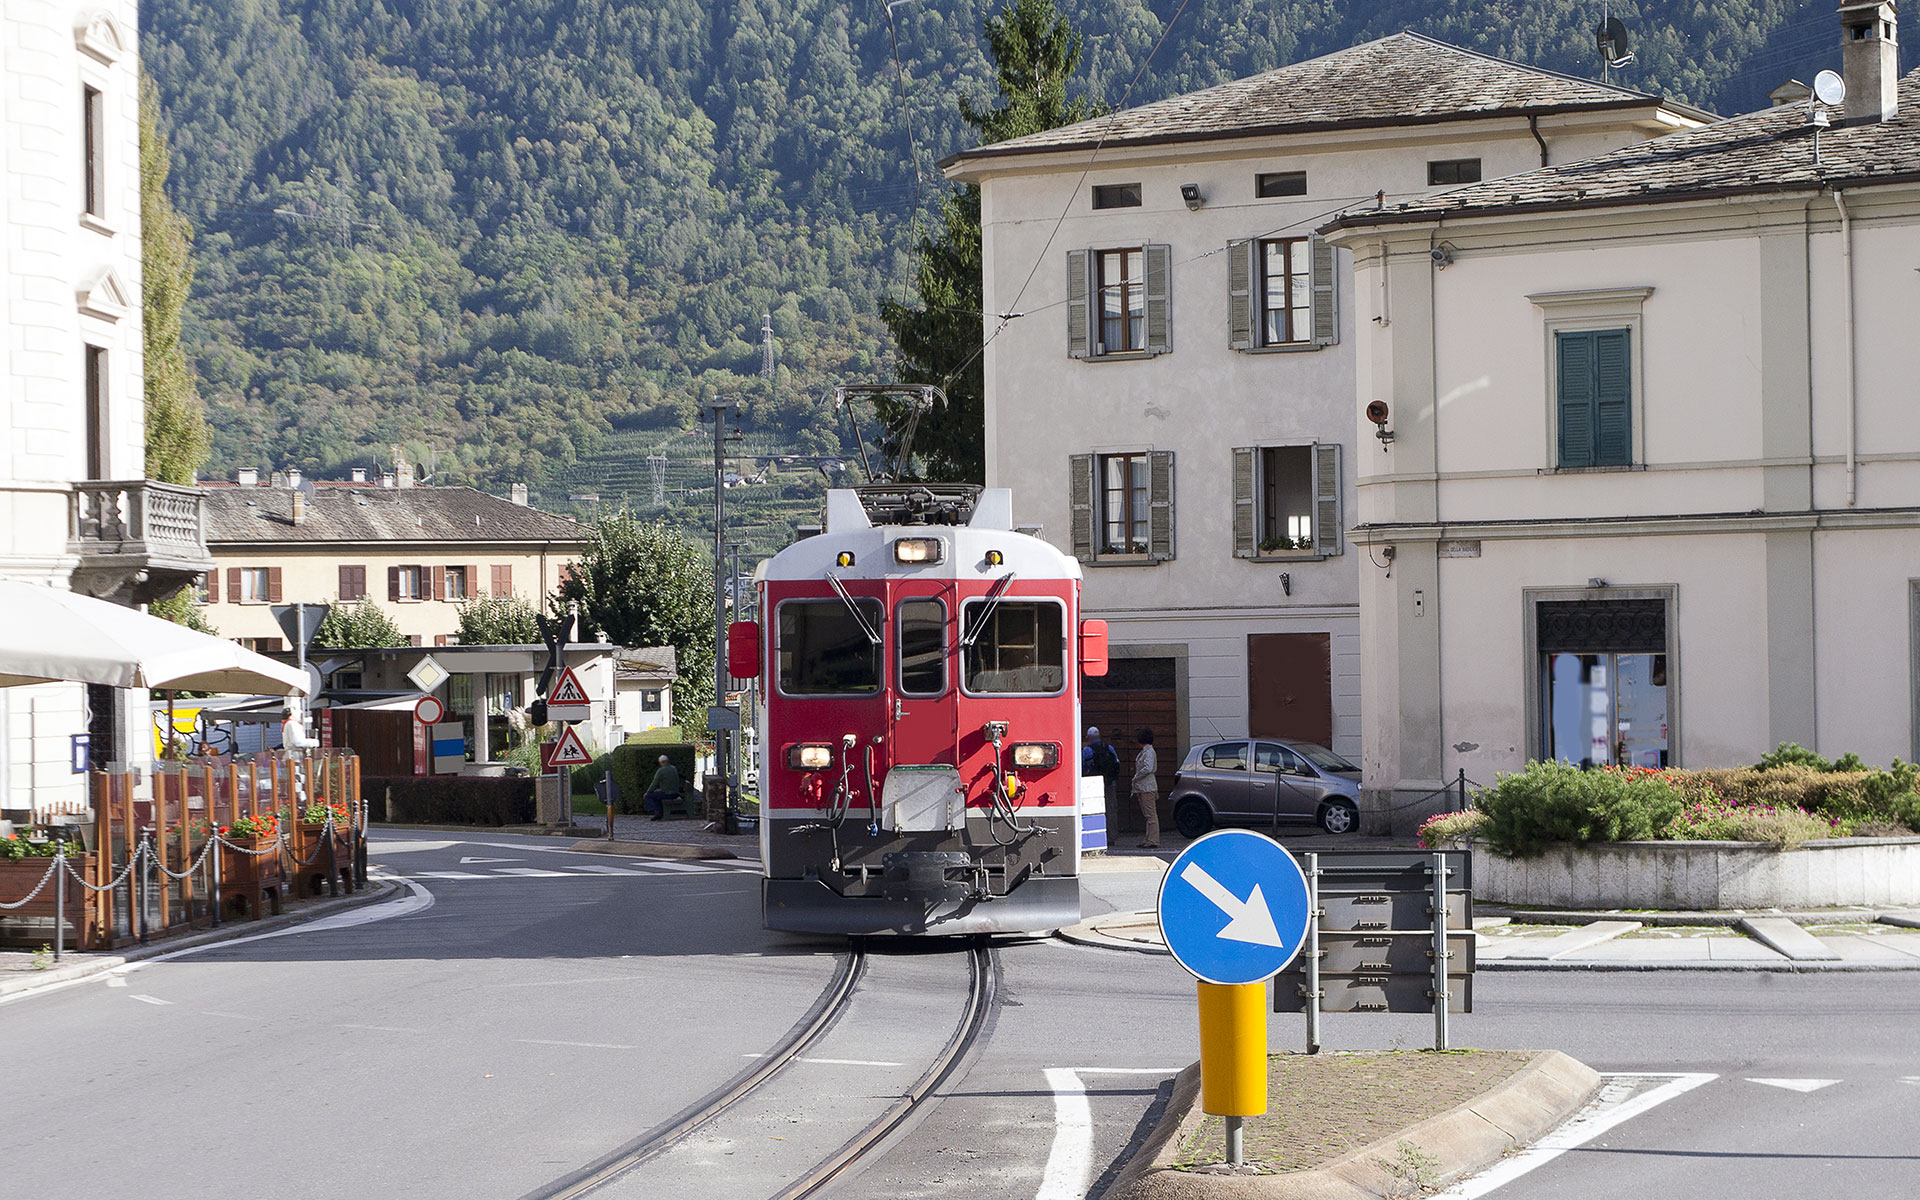 A Swiss train on the Bernina route arrives in Tirano. The railway actually threads through the streets of the Italian town (photo © Janis Smits / dreamstime.com)